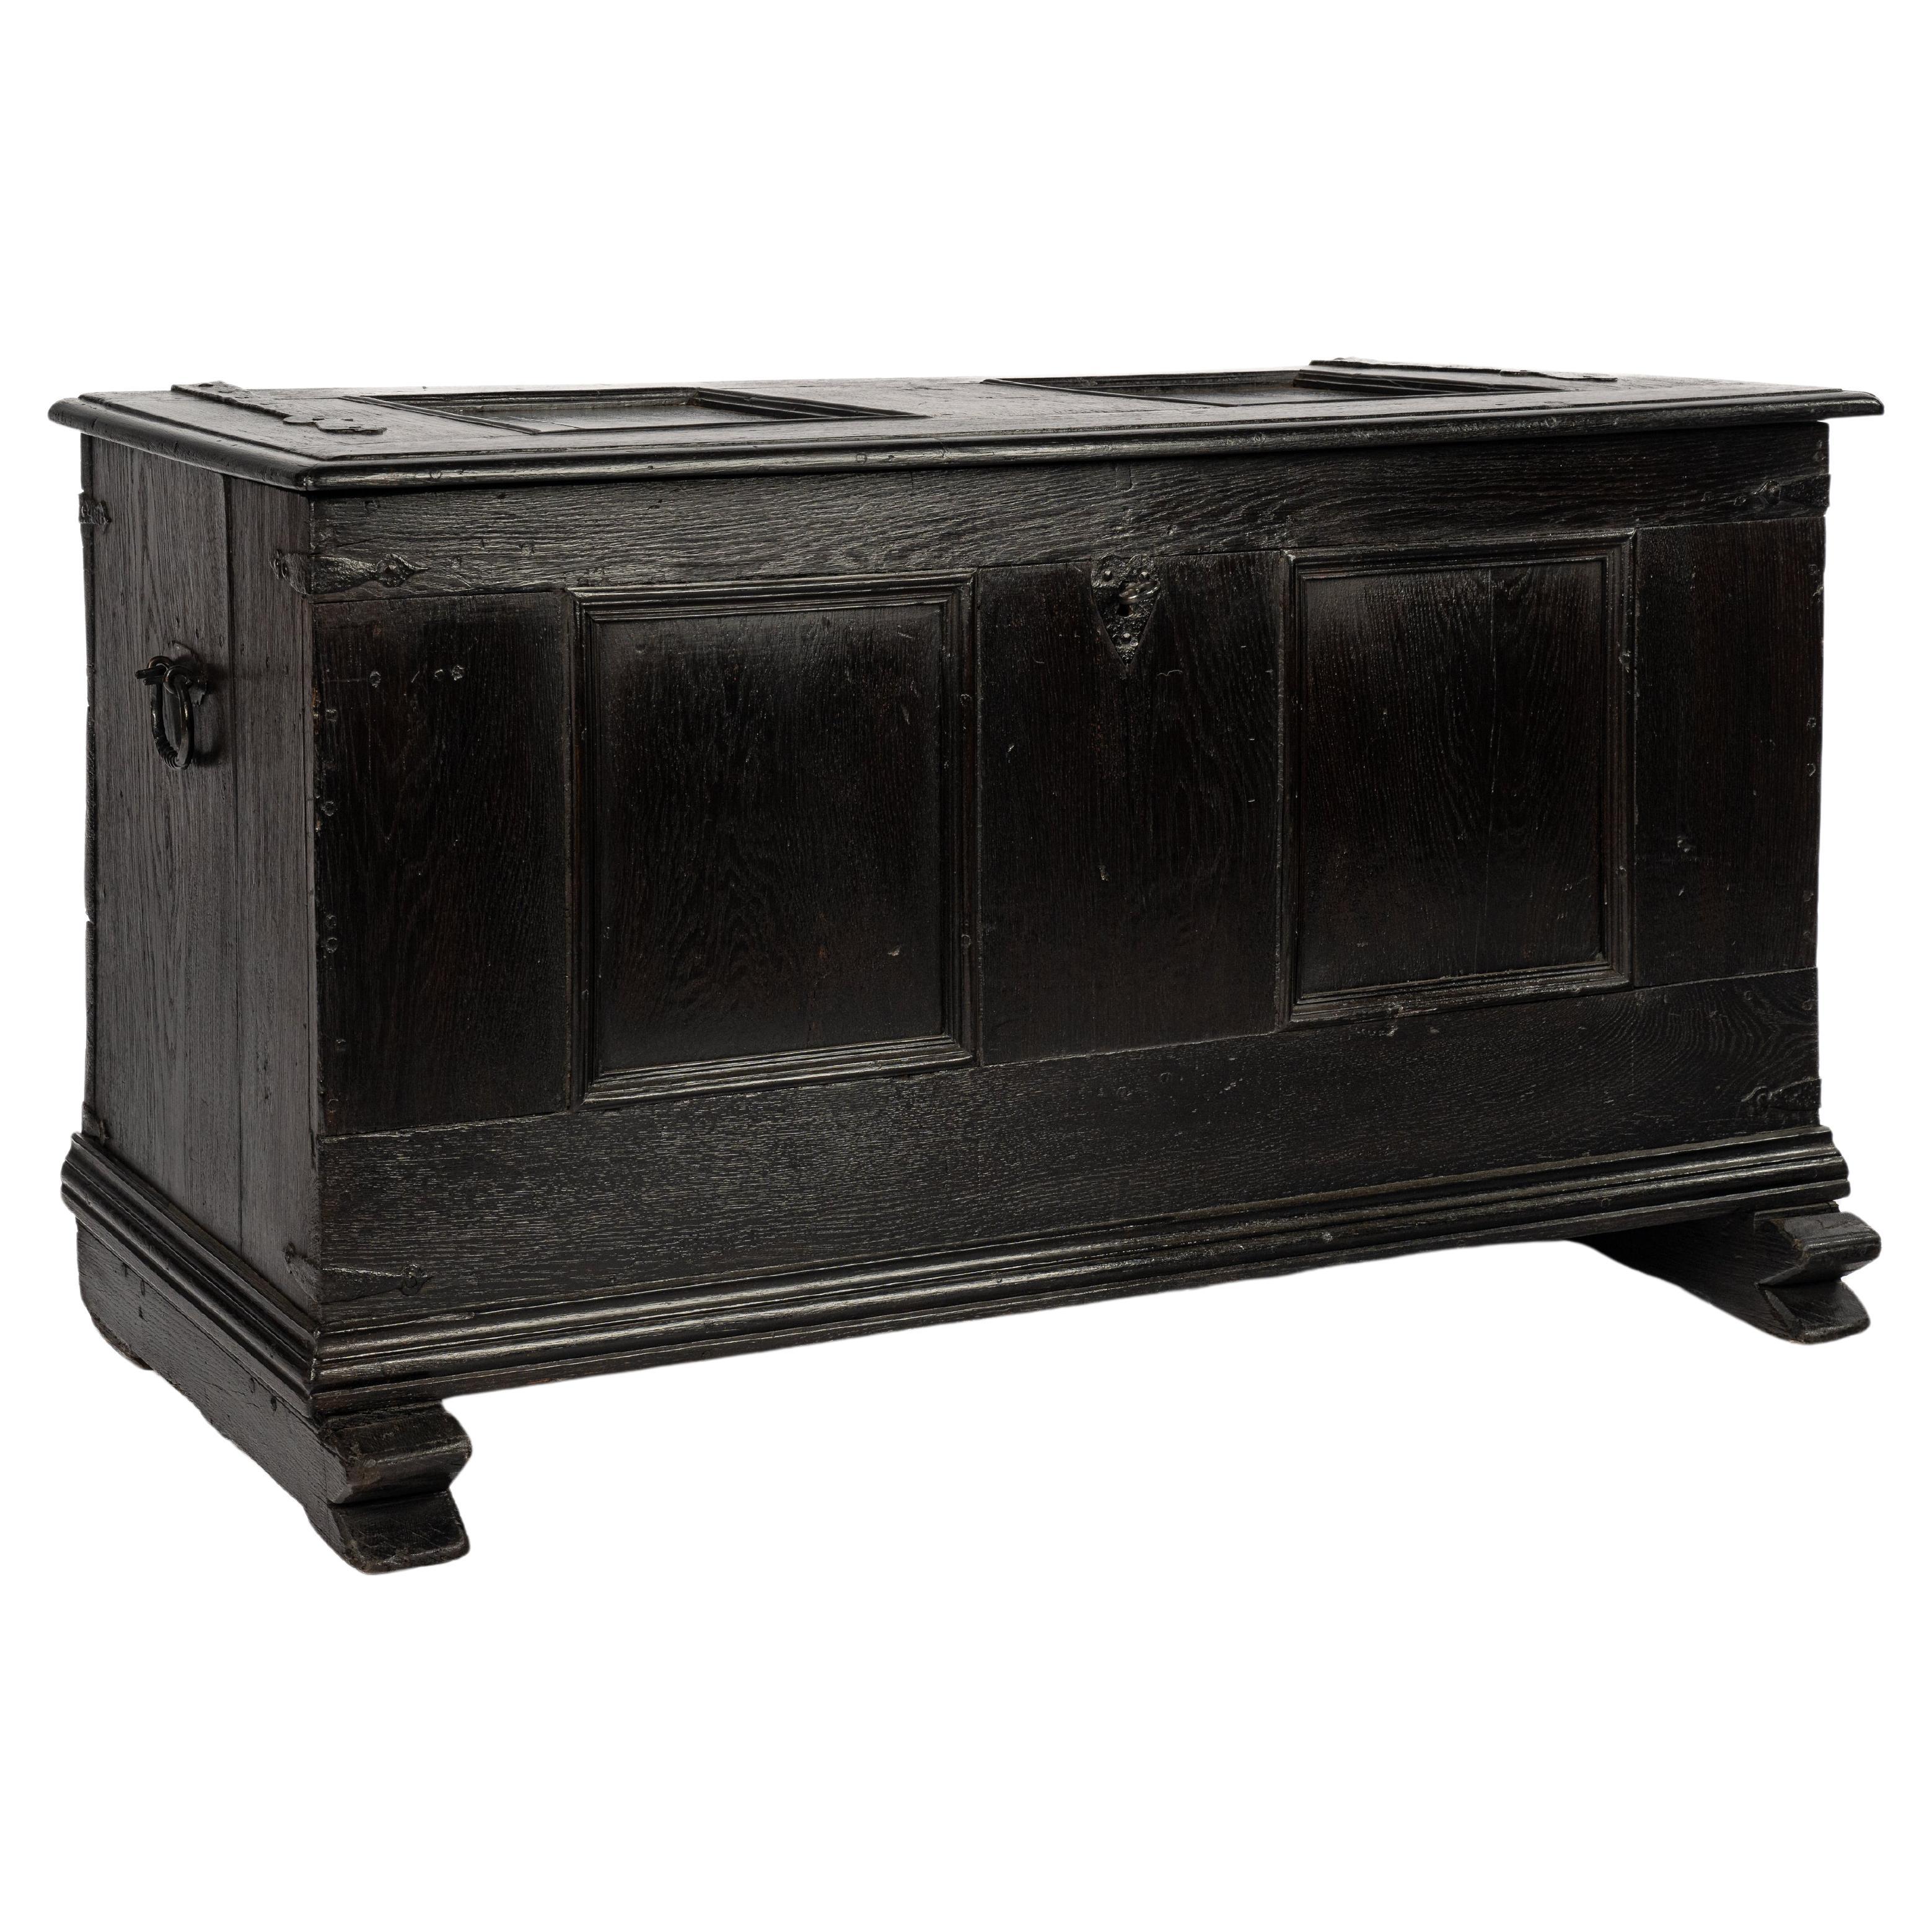  Antique late 18th century German Solid black Oak panelled trunk or coffer For Sale